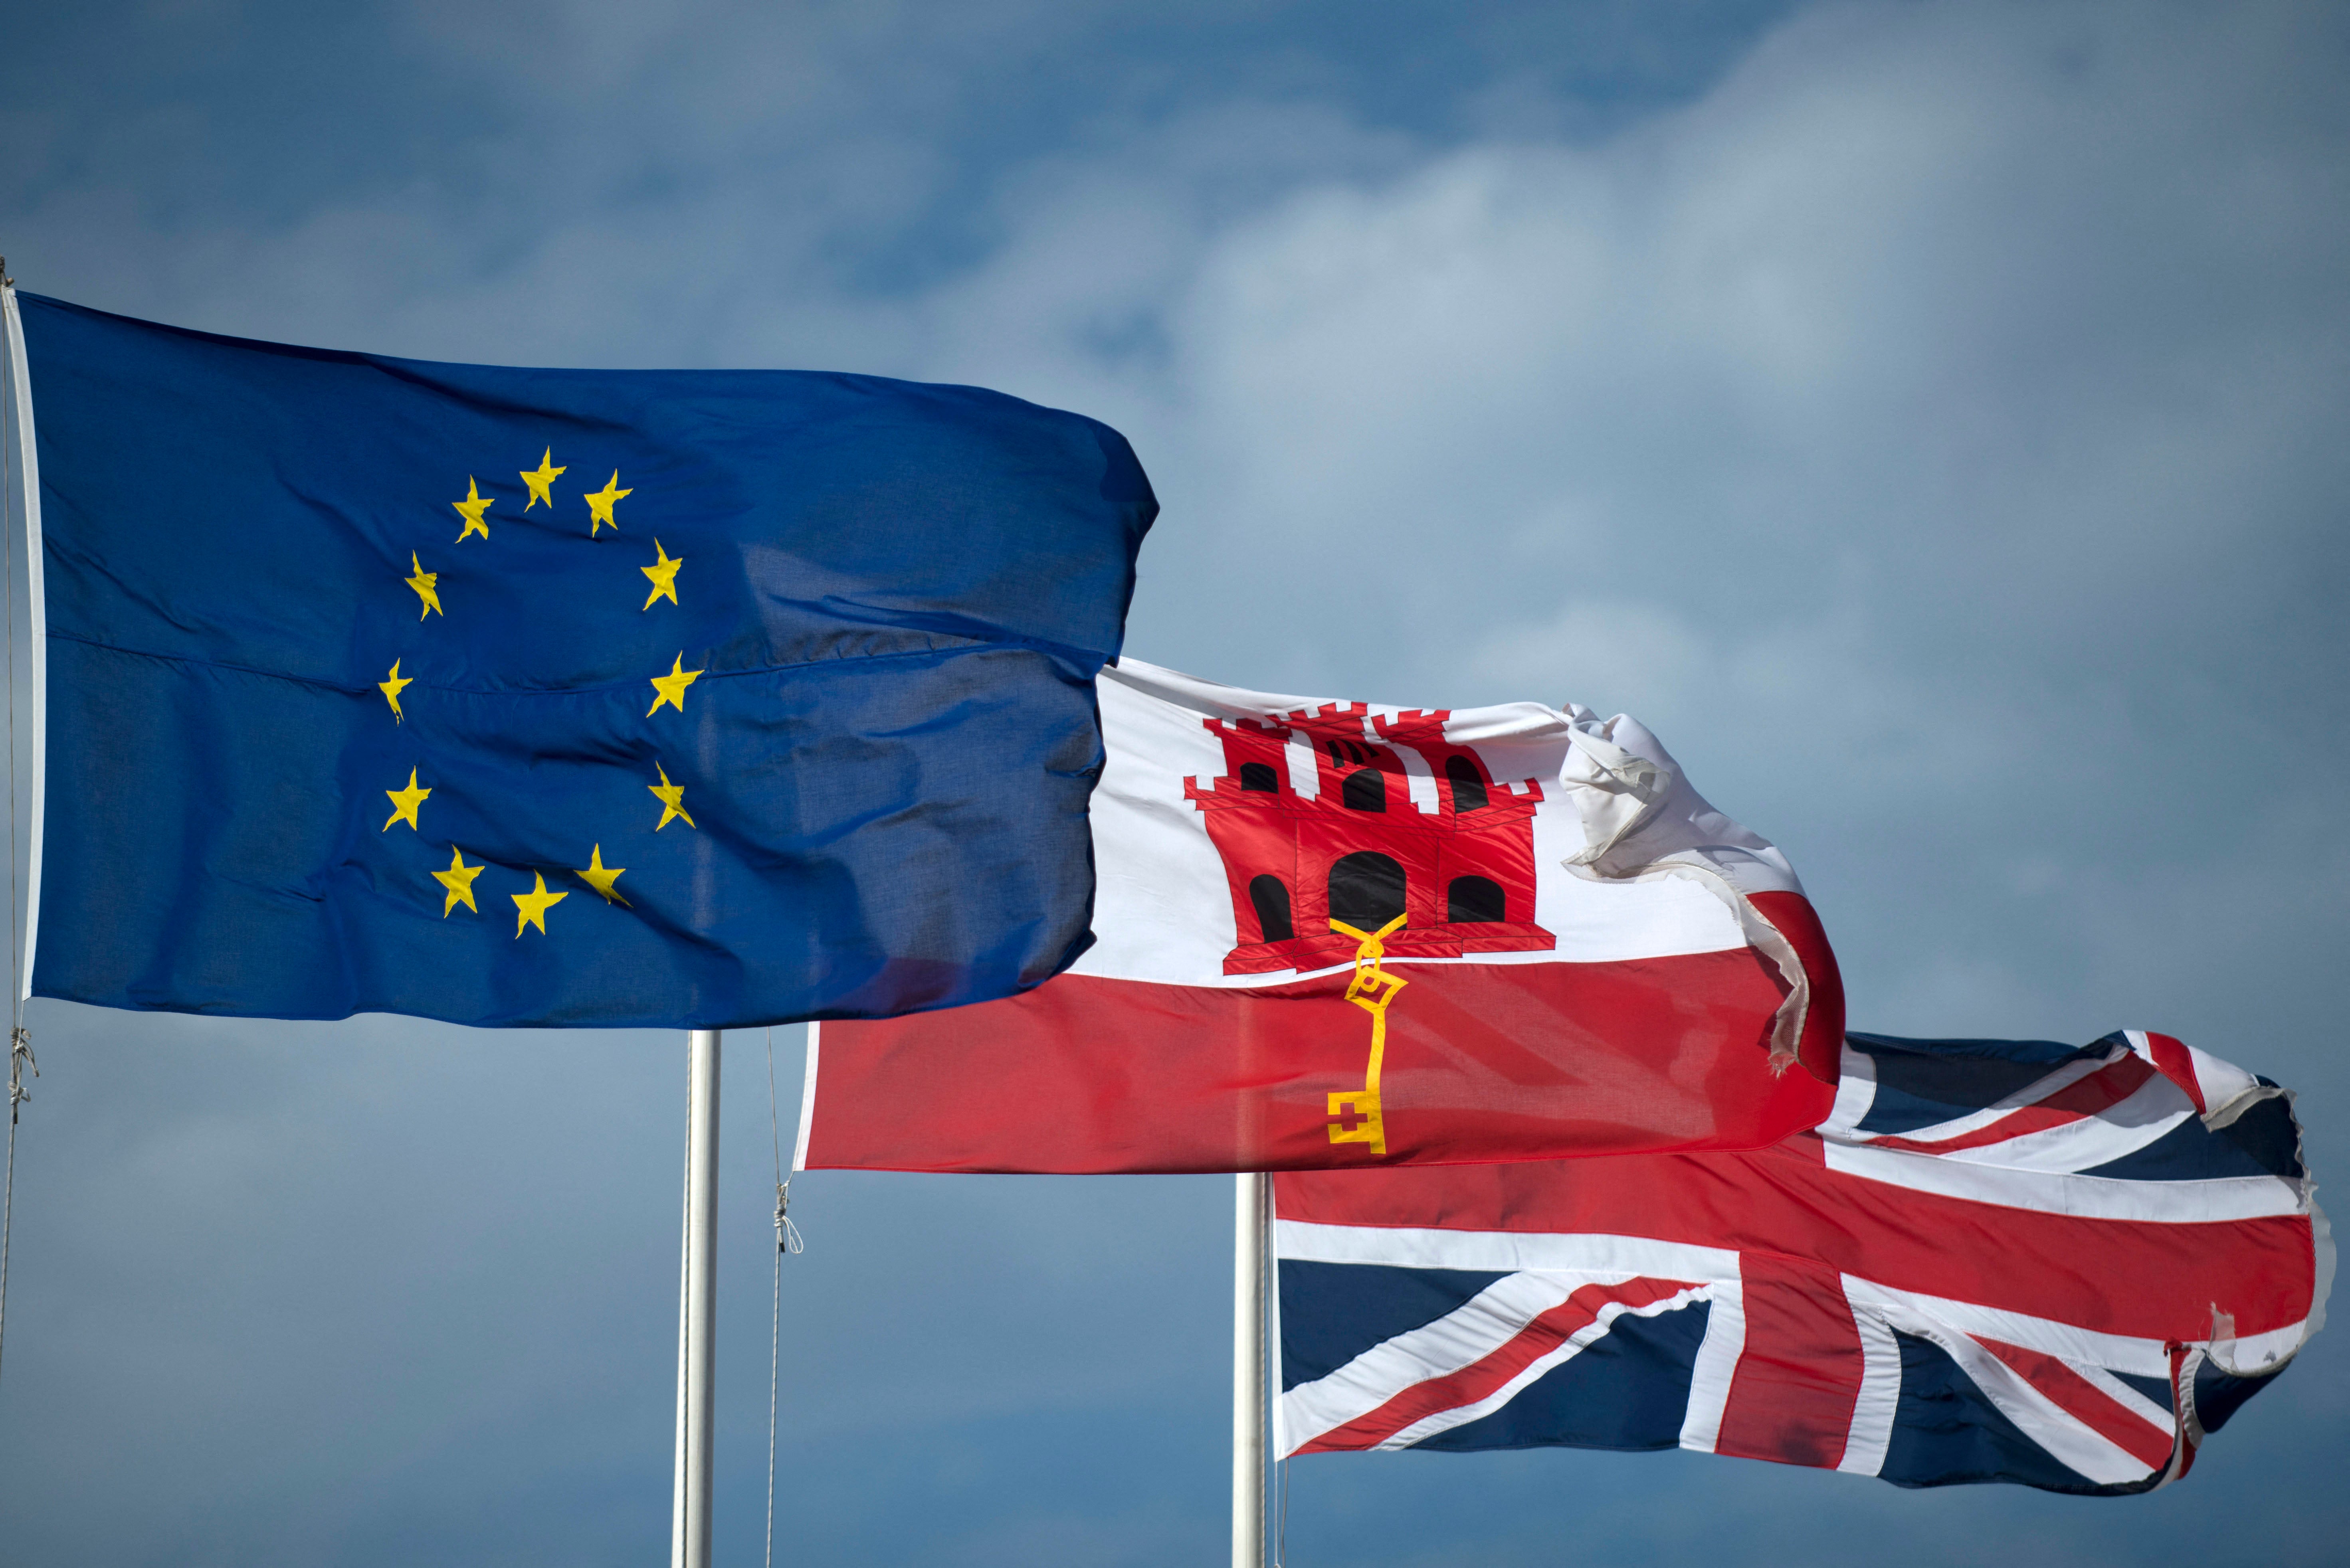 British and EU flags fly next to Gibraltar’s flag